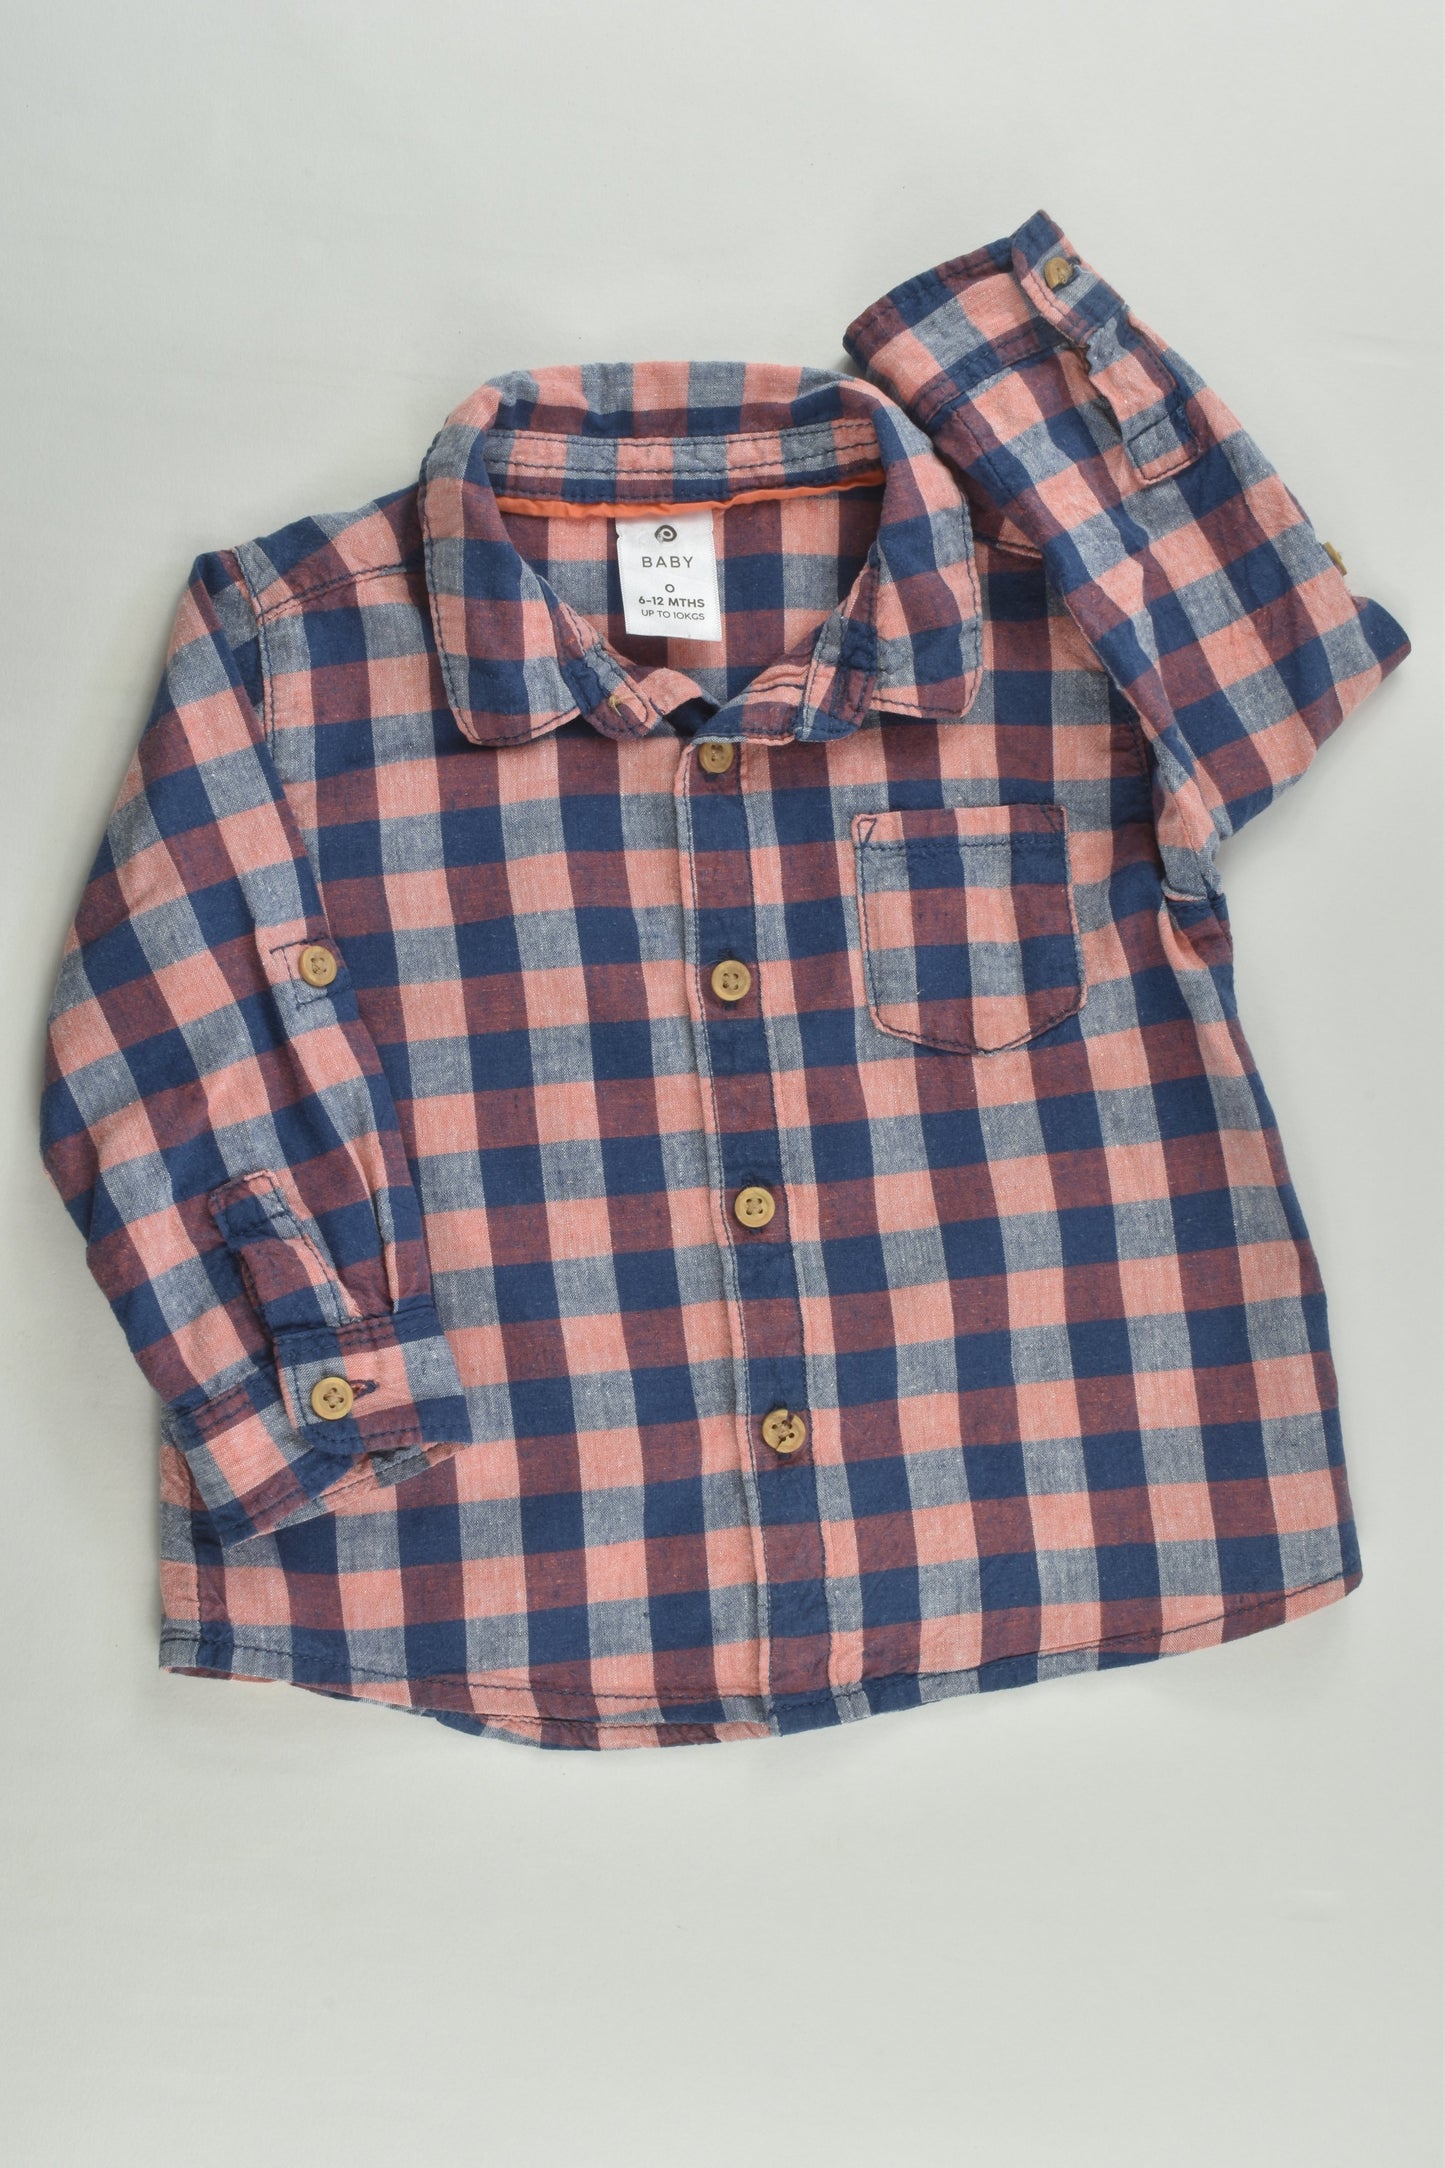 Target Size 0 Checked Shirt